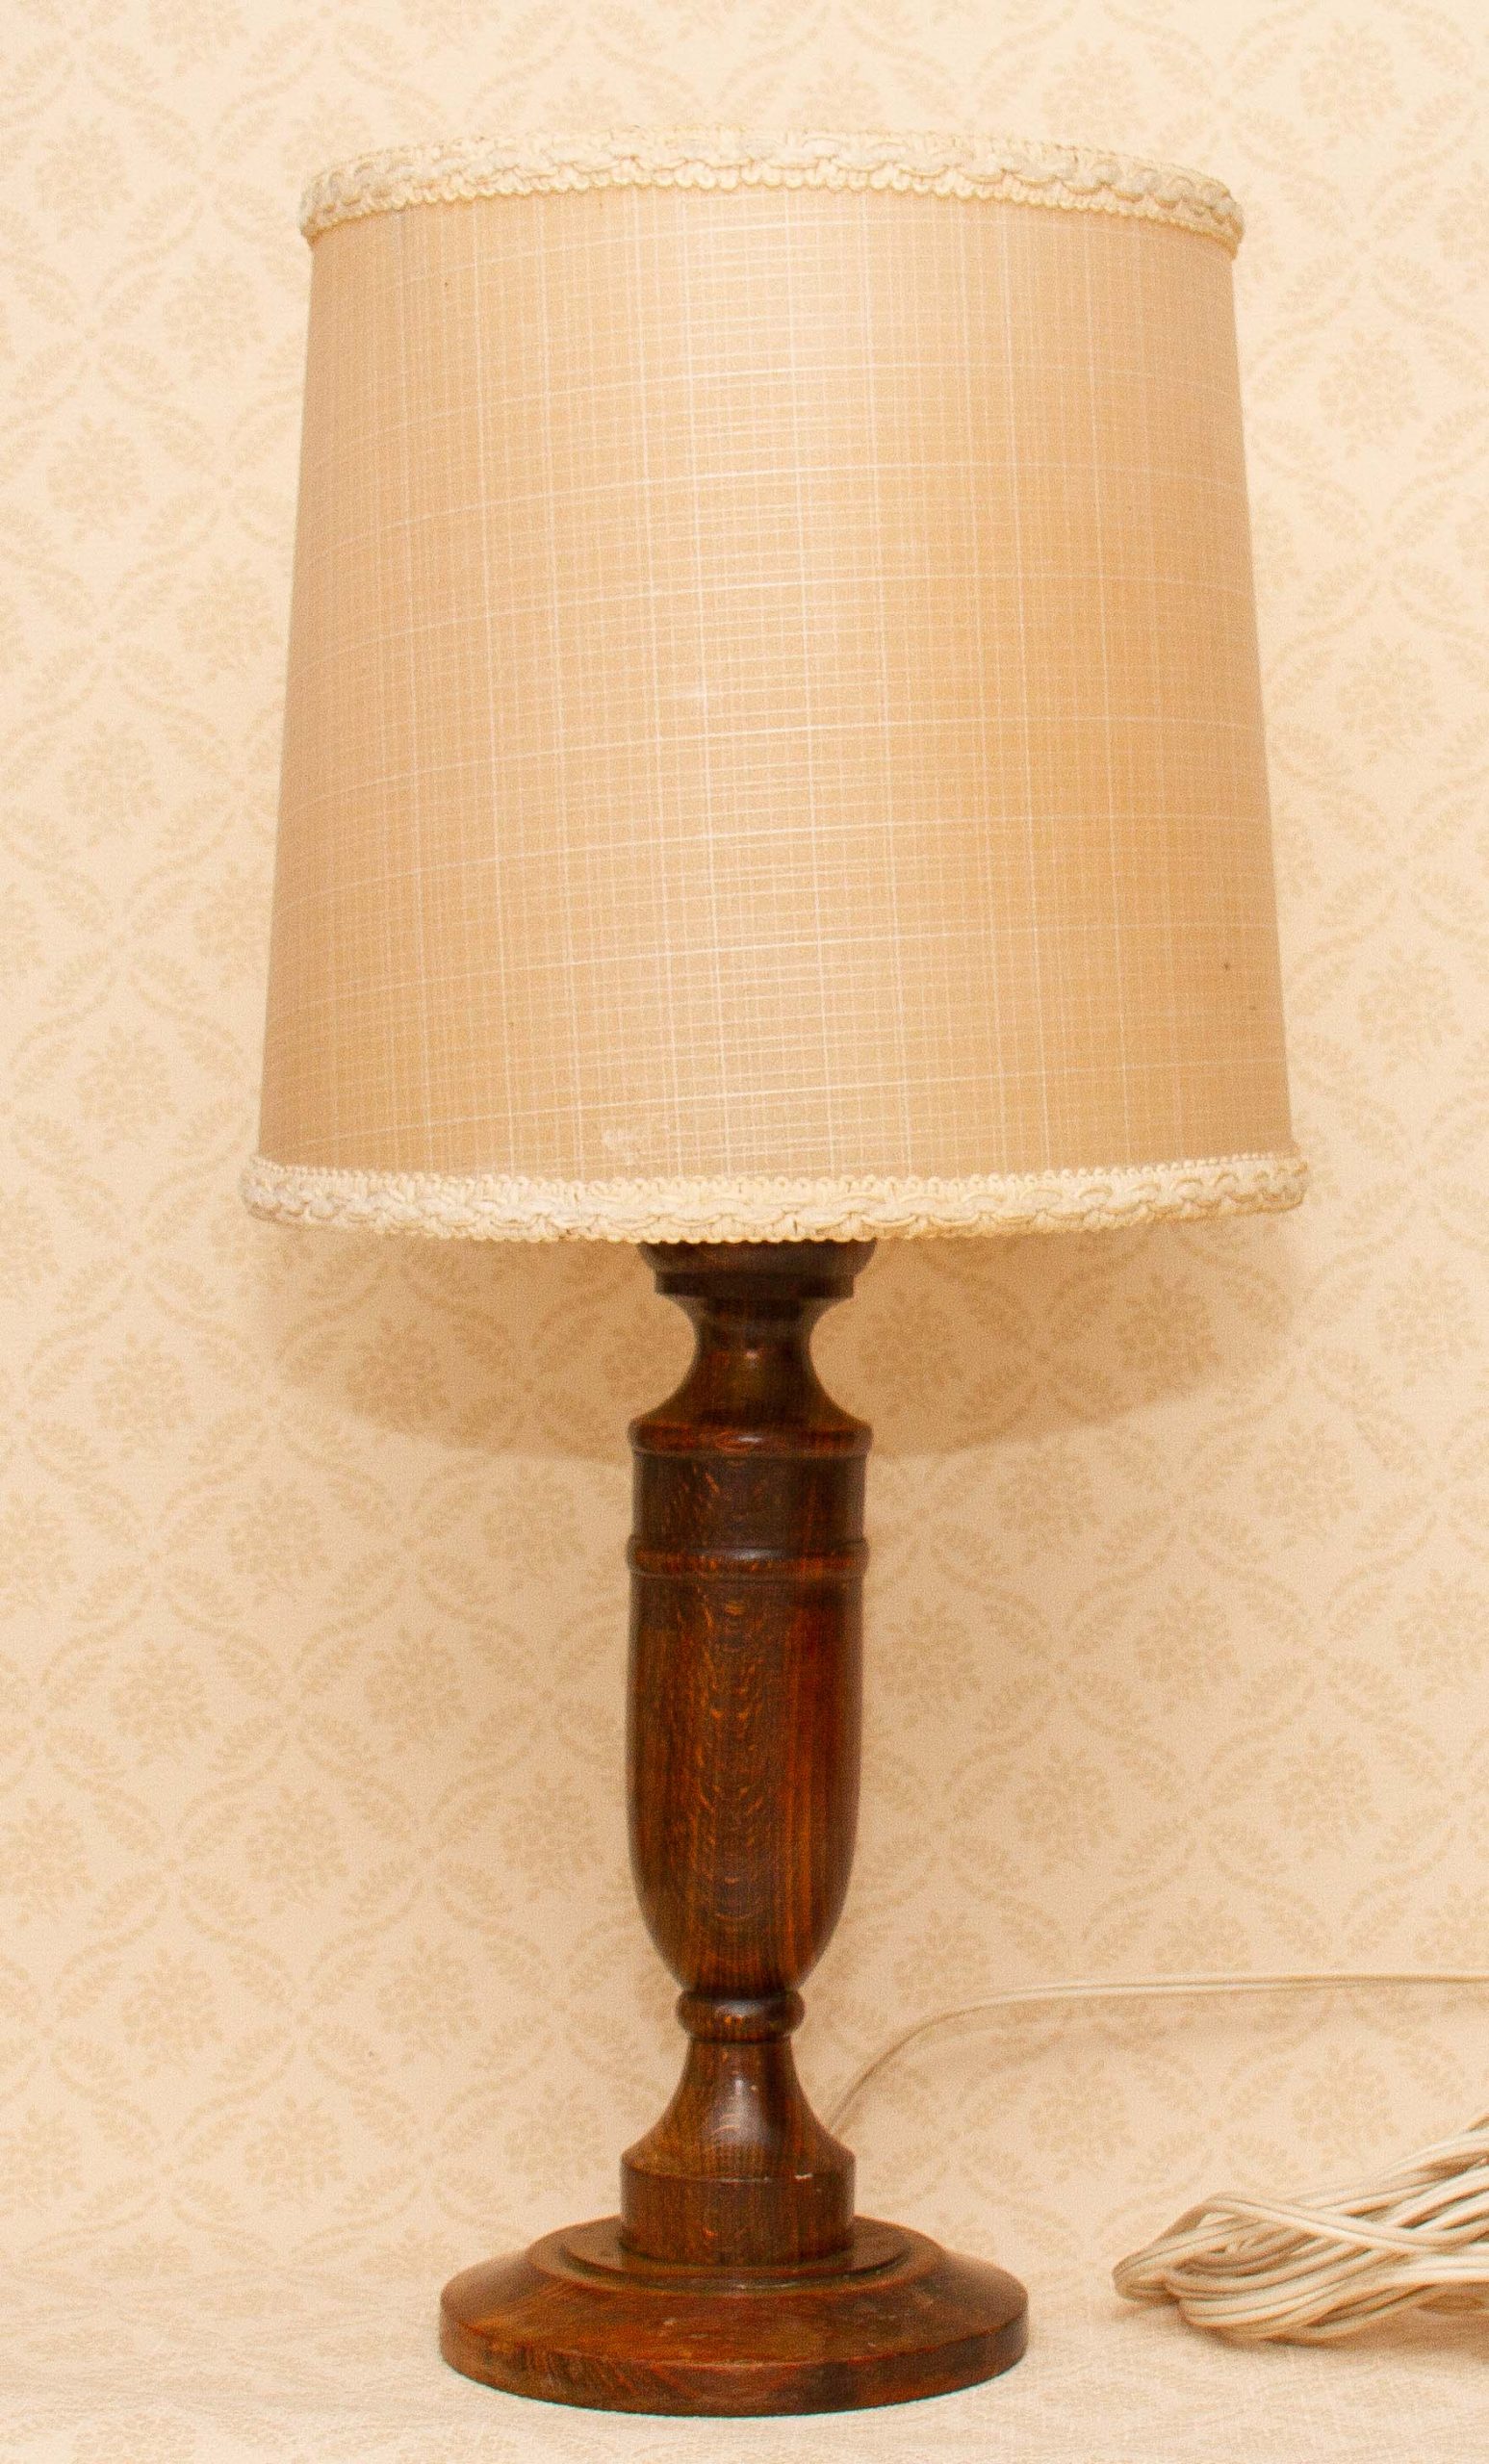 Vintage Turned Wood Table Lamp Shade, Vintage Wooden Table Lamp Shade